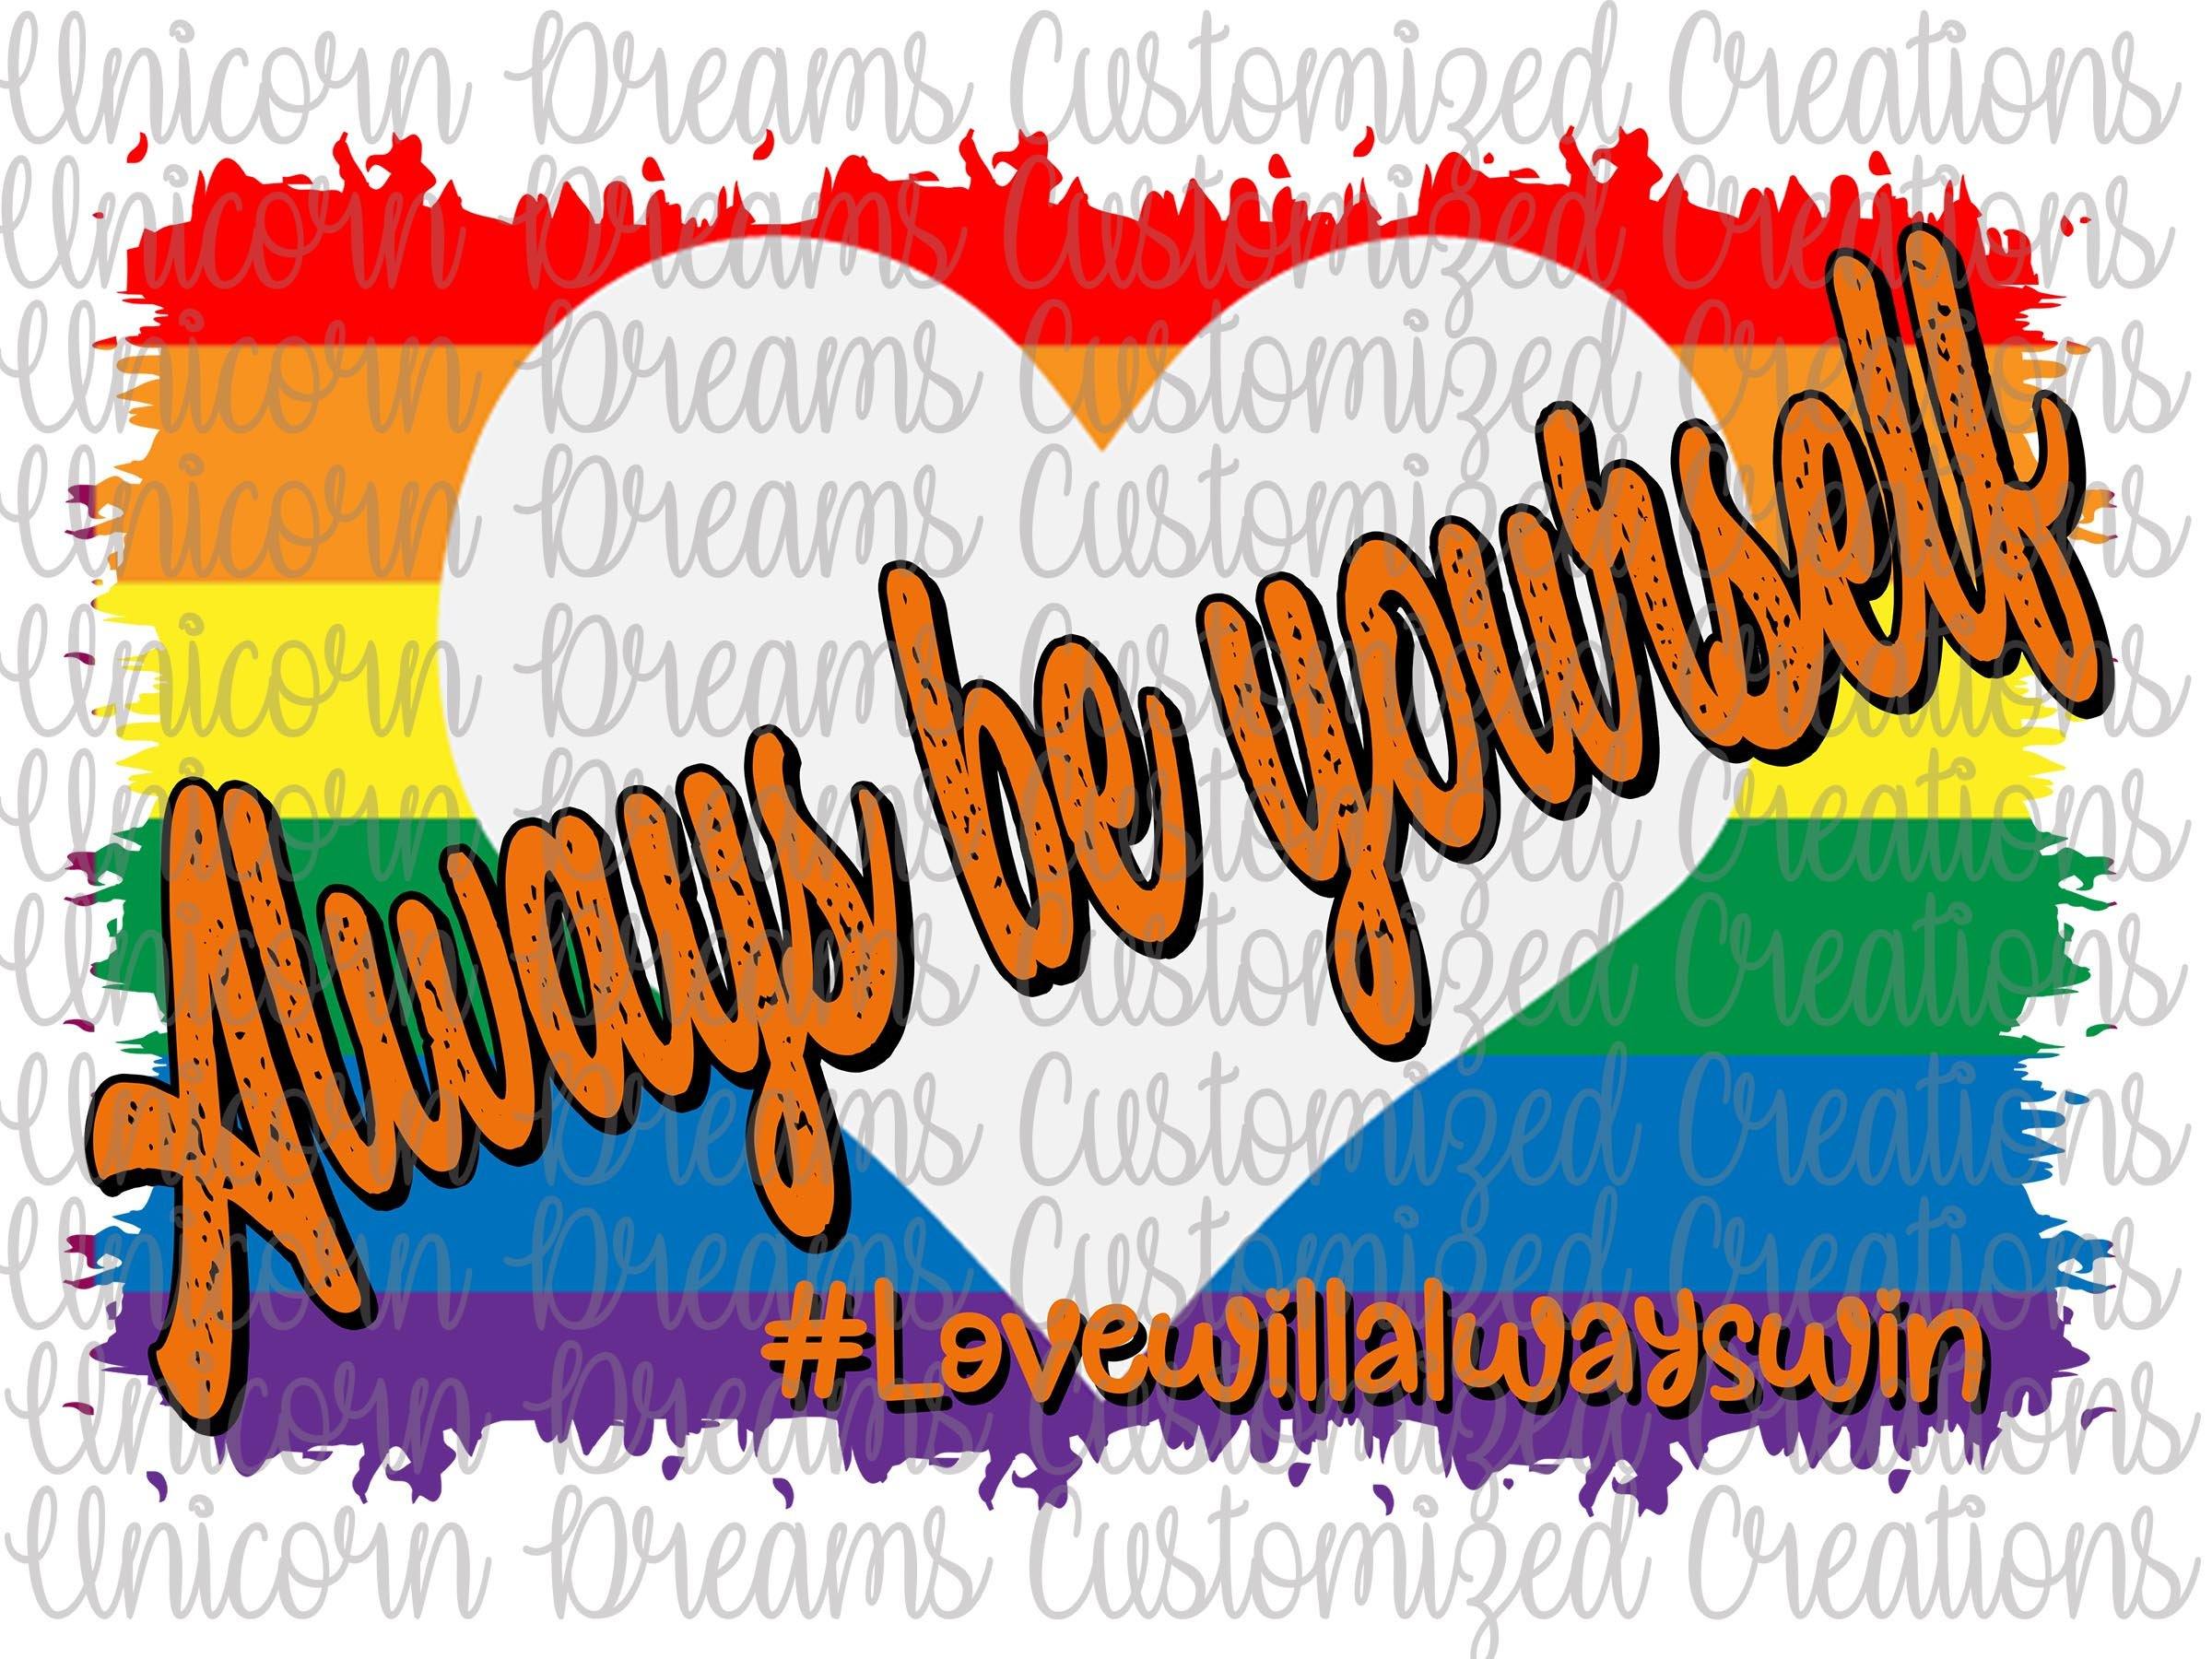 Always Be Yourself PNG Digital Download, Sublimation Design - Unicorn Dreams Customized Creations